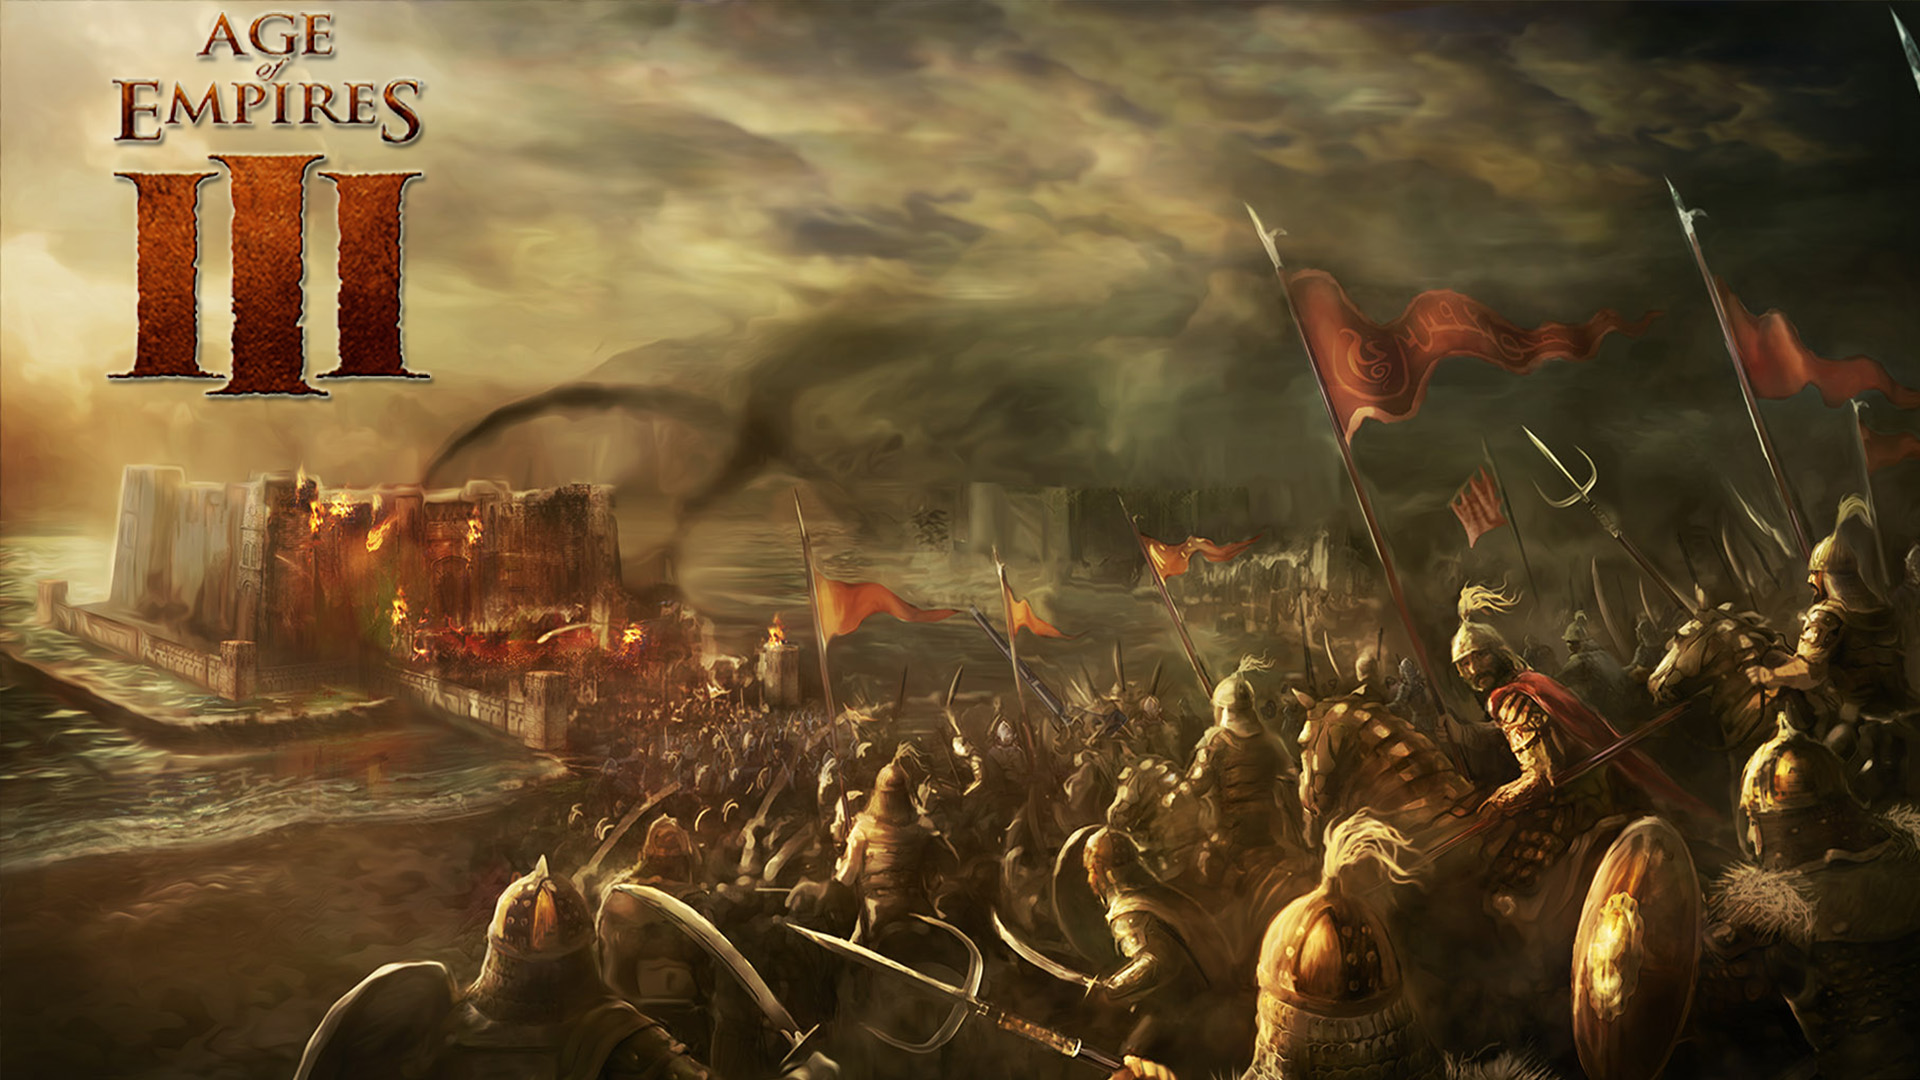 Look at this wallpaper - IV - Discussion - Age of Empires Forum